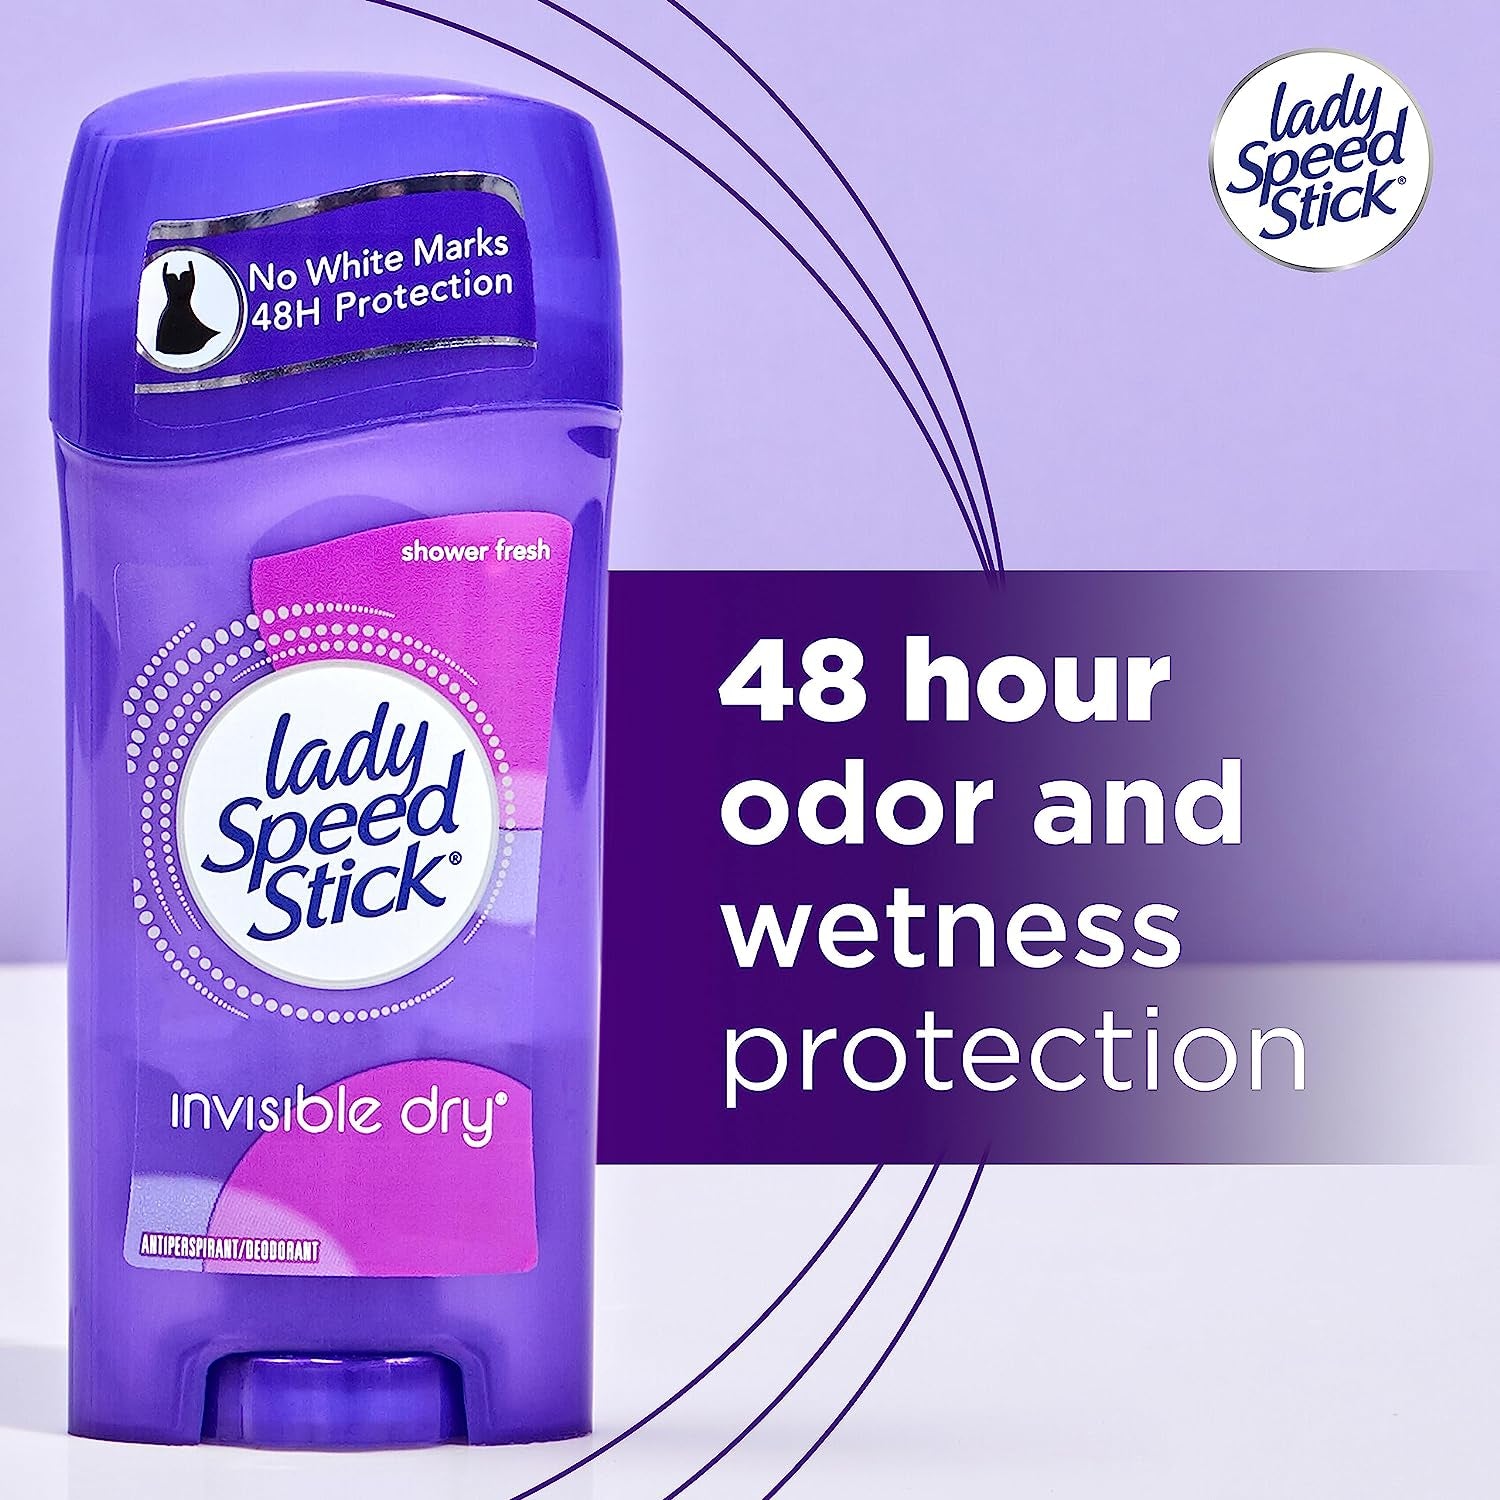 Lady Speed Stick Invisible Dry Antiperspirant Deodorant, Shower Fresh, 2.3Oz, 4 Pack